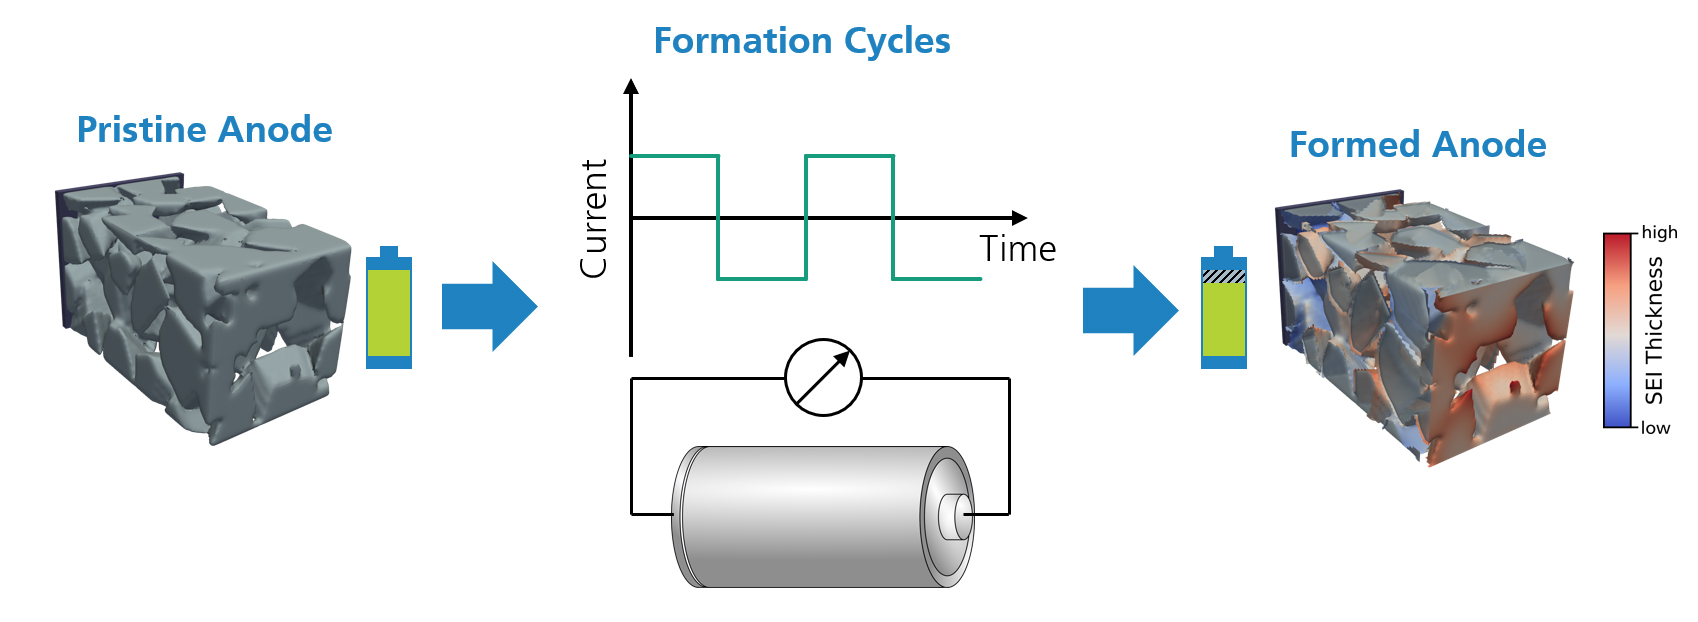 The Formation Cycles